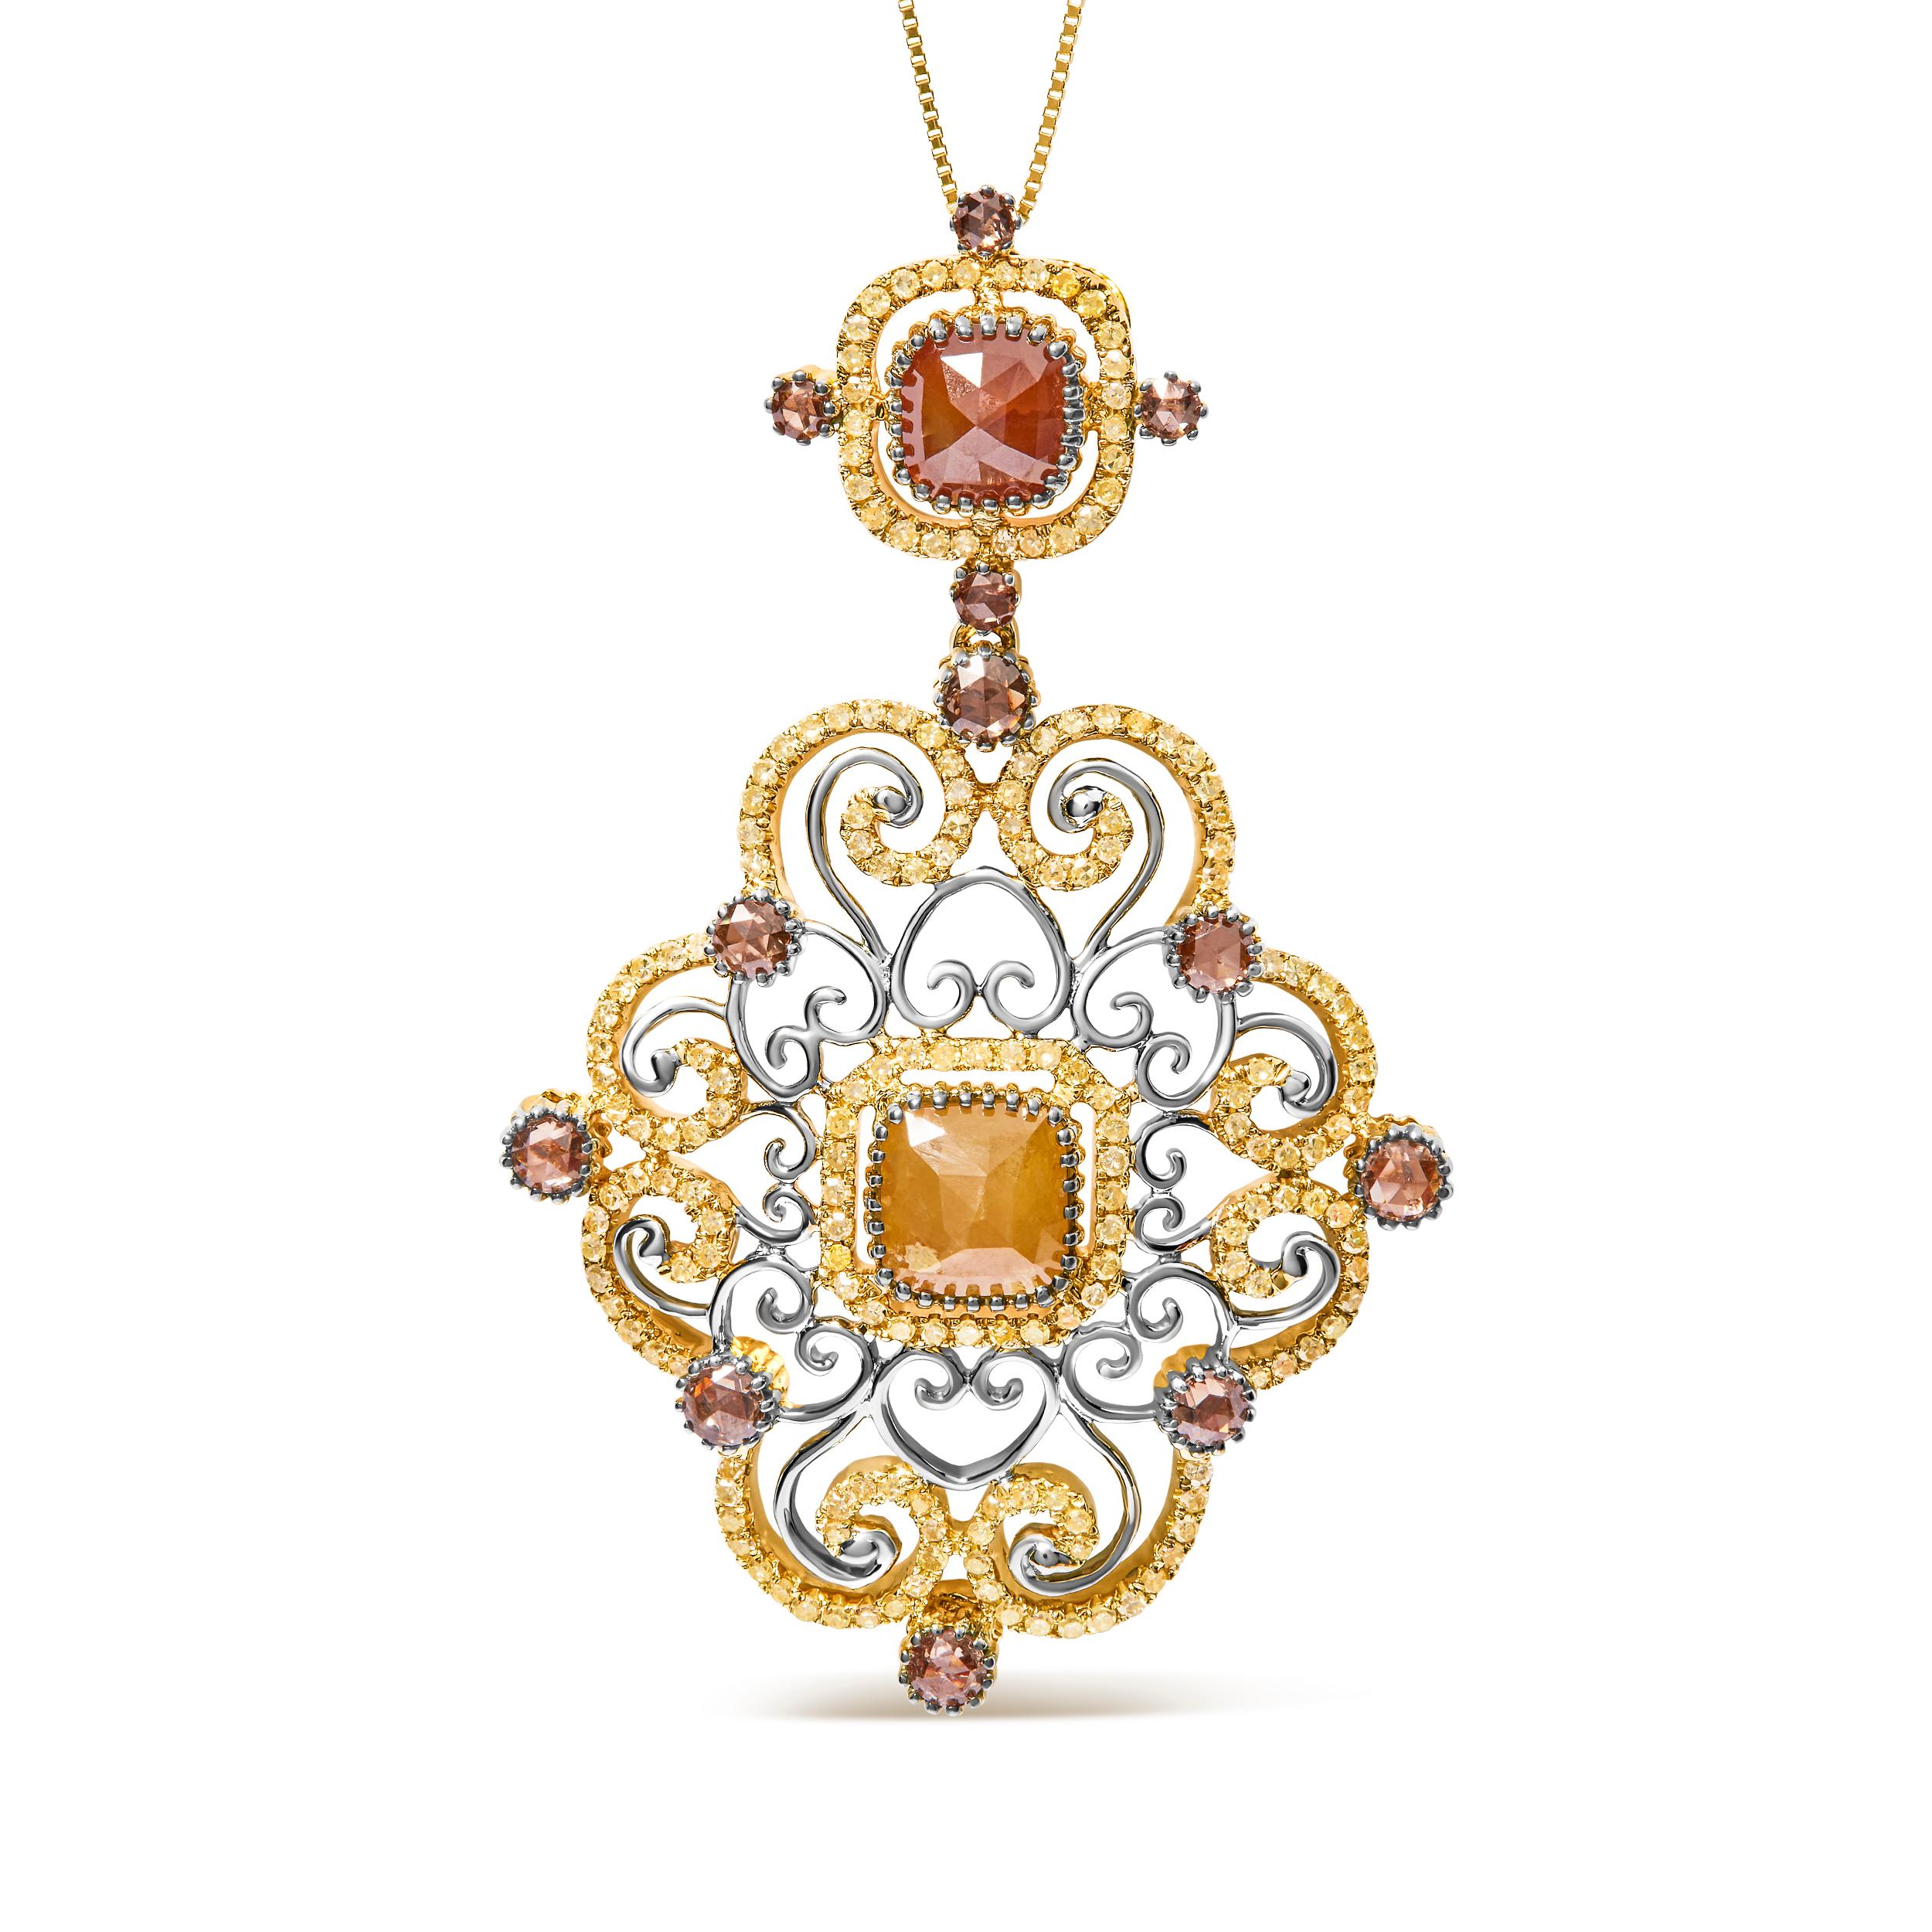 Introducing a captivating masterpiece that effortlessly blends vintage charm with modern elegance. This exquisite 14K White and Yellow Gold Pendant Necklace is adorned with a mesmerizing array of Fancy Color Rose Cut Diamonds, totaling a remarkable